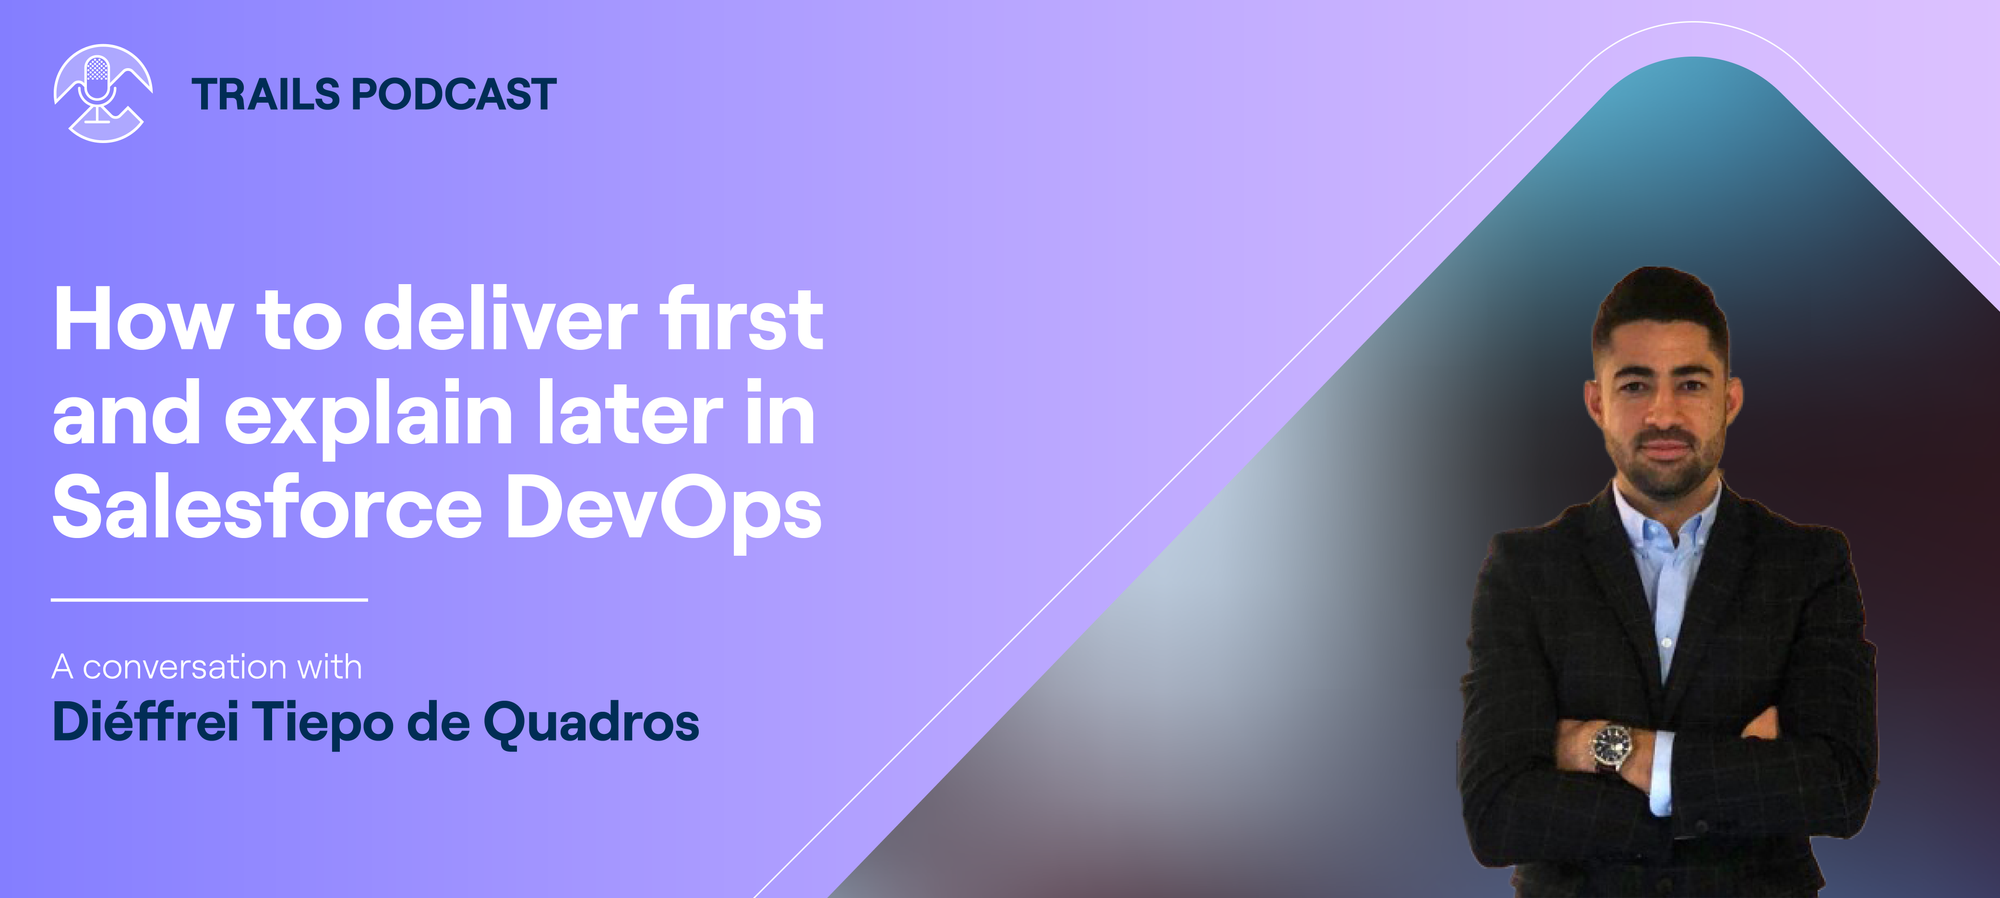 How to deliver first and explain later in Salesforce DevOps (Trails Podcast episode #15 with Diéffrei Tiepo de Quadros)